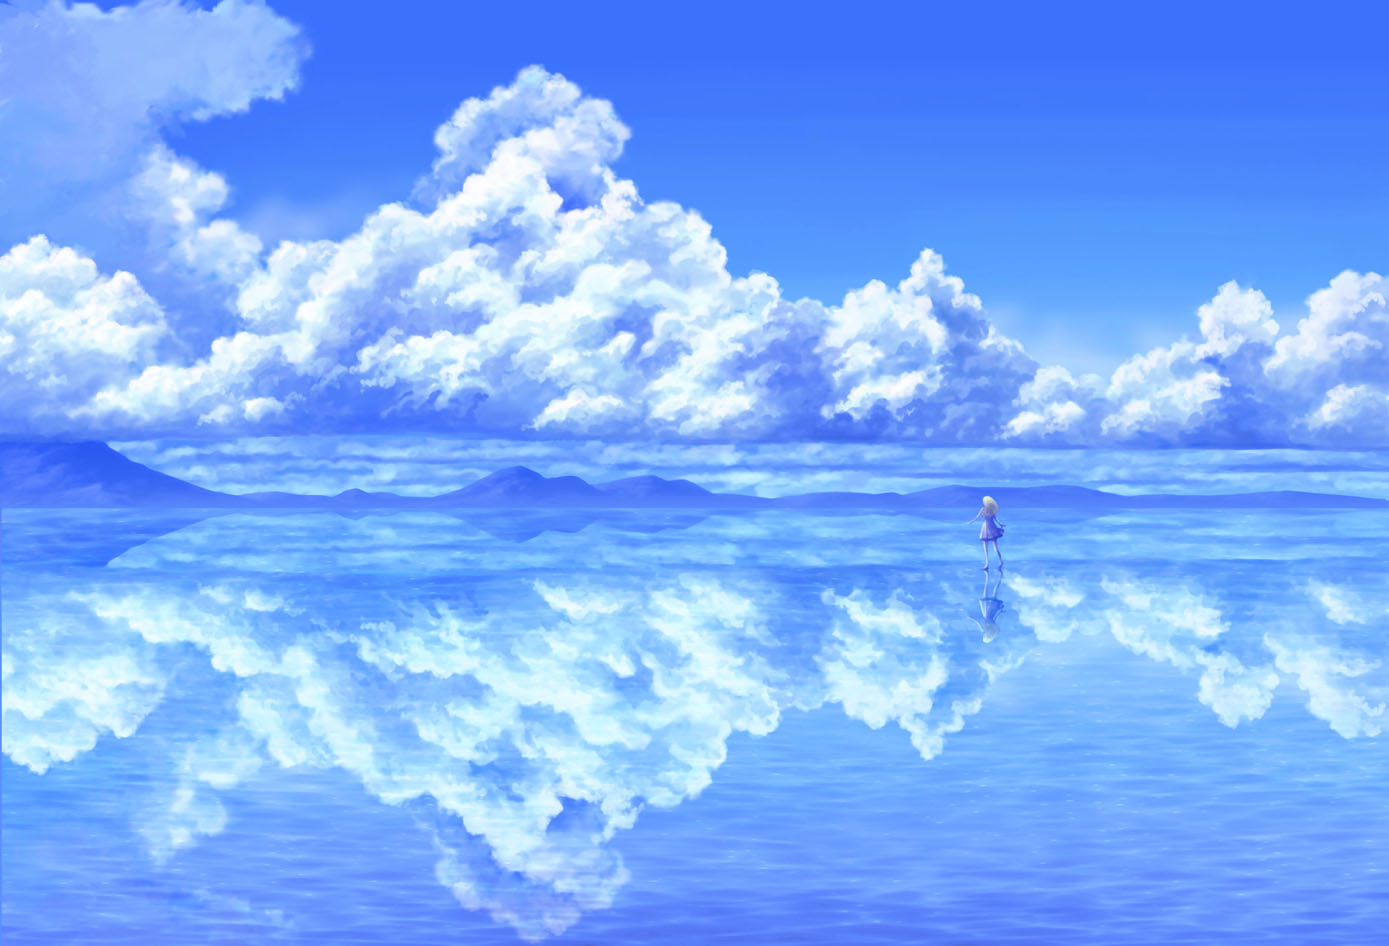 Aesthetic Anime Sky Pc Wallpapers Wallpaper Cave